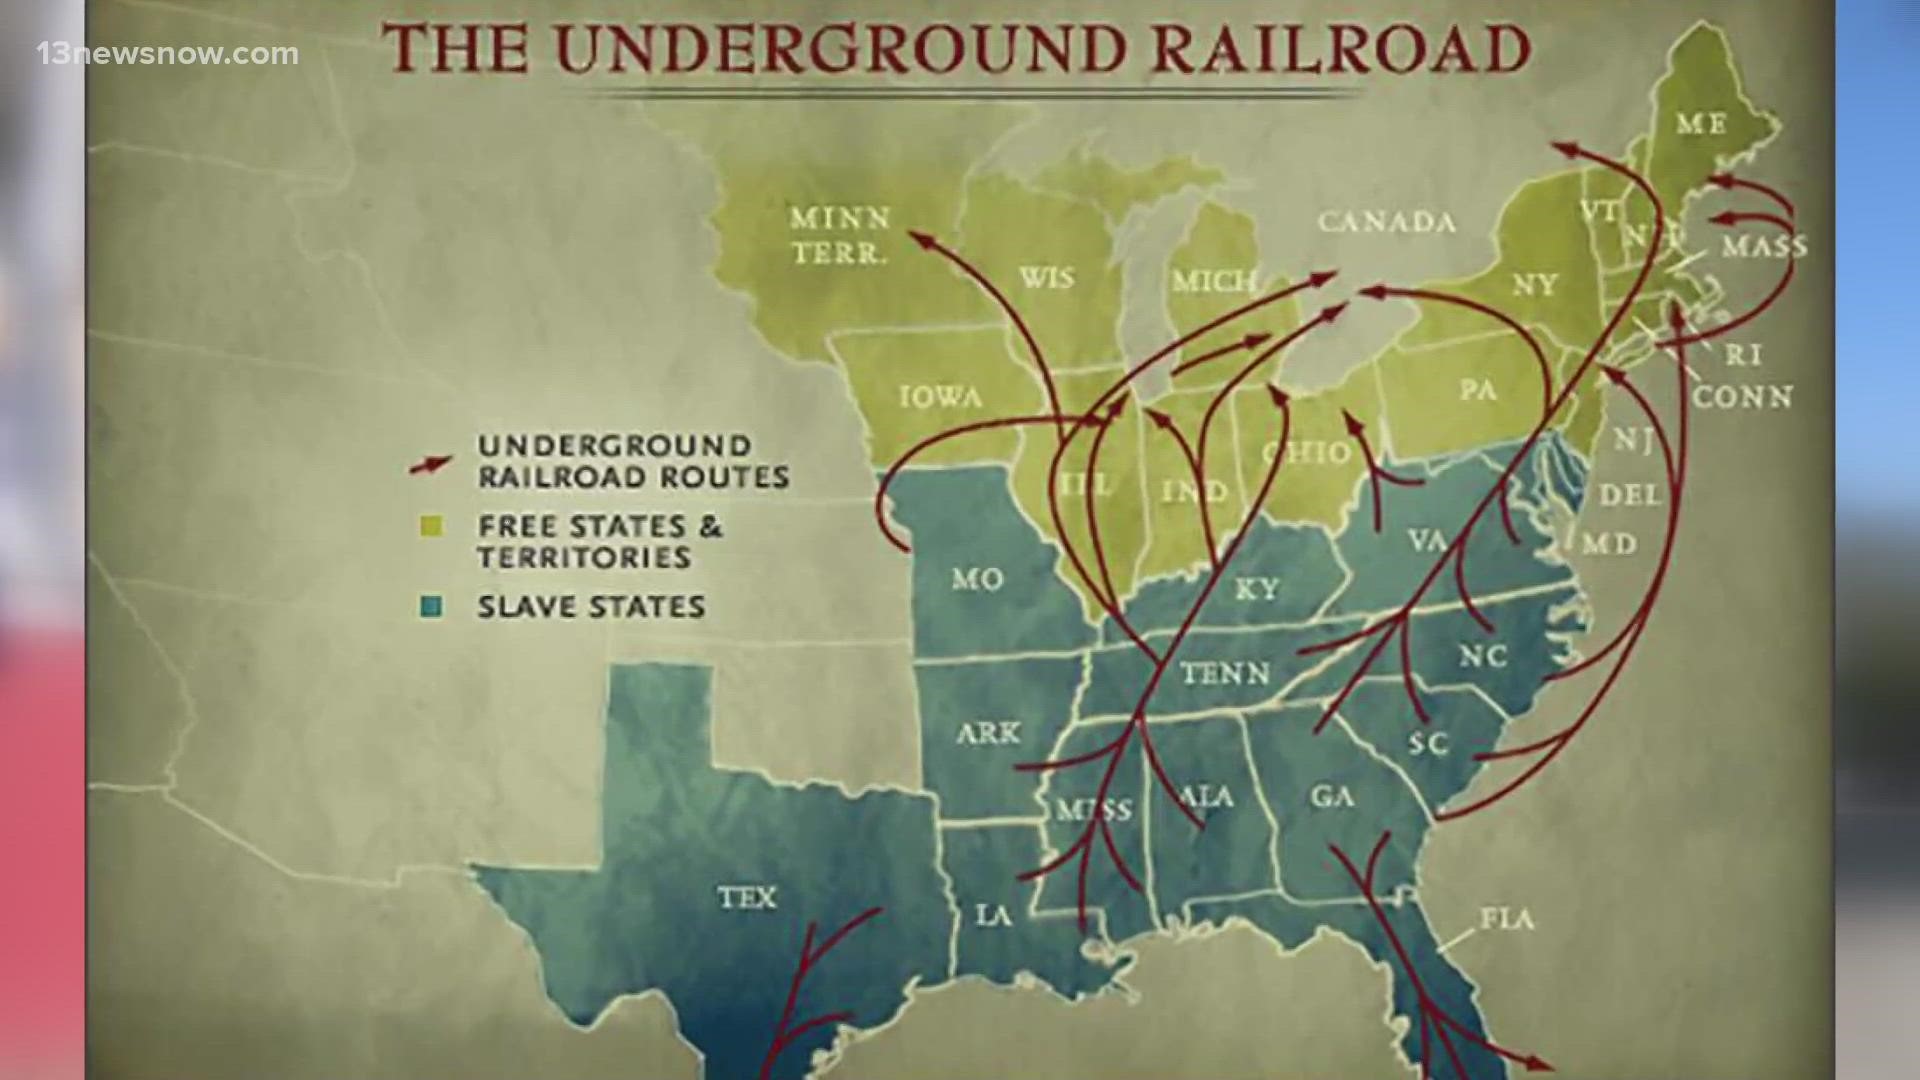 The city has an Underground Railroad walking tour, where you can see different sites that were important for the sought freedom of slaves.